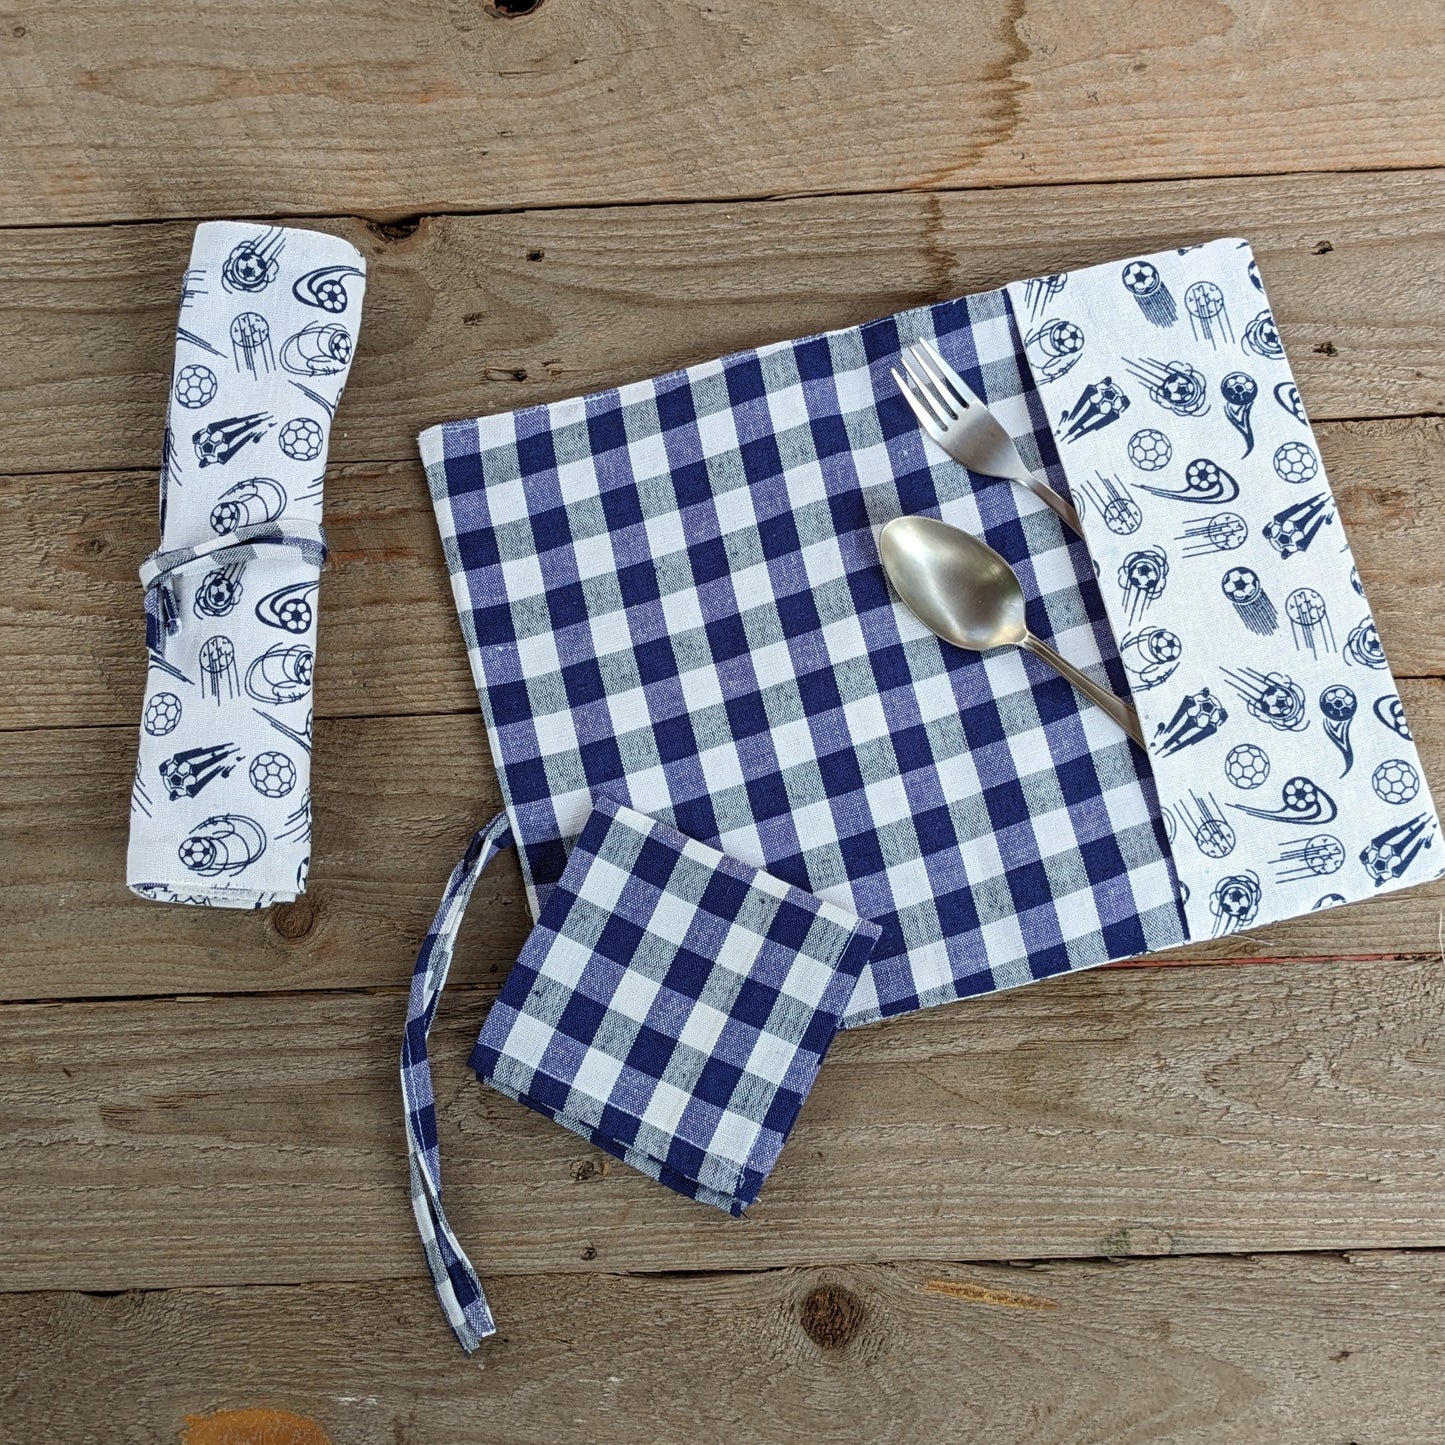 A cutlery roll that opens up to become a placemat, ideal for school children or anyone who carries lunch box. Fun Dinosaur prints which make for great Christmas gifts and return gifts for kids parties.